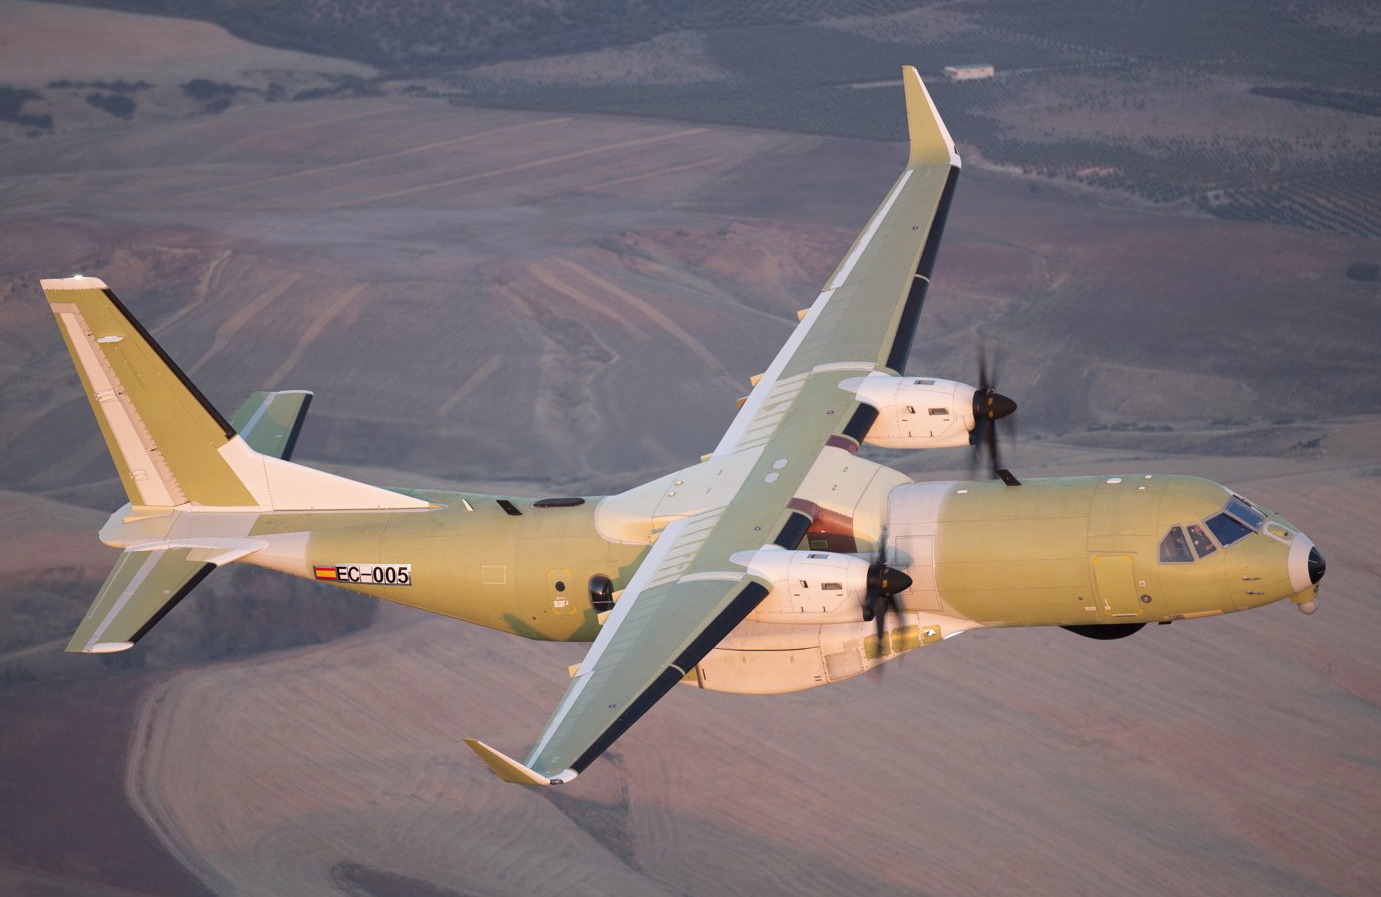 The first Airbus C295, purchased by the Government of Canada for the Royal Canadian Air Force’s (RCAF) Fixed Wing Search and Rescue Aircraft Replacement (FWSAR) program, has completed its maiden flight, marking a key milestone towards delivery by the end of 2019 to begin operational testing by the RCAF. The aircraft, designated CC-295, took off from Seville, Spain, on 4 July at 20:20 local time (GMT+1) and landed back on site one hour and 27 minutes later. Click to enlarge.